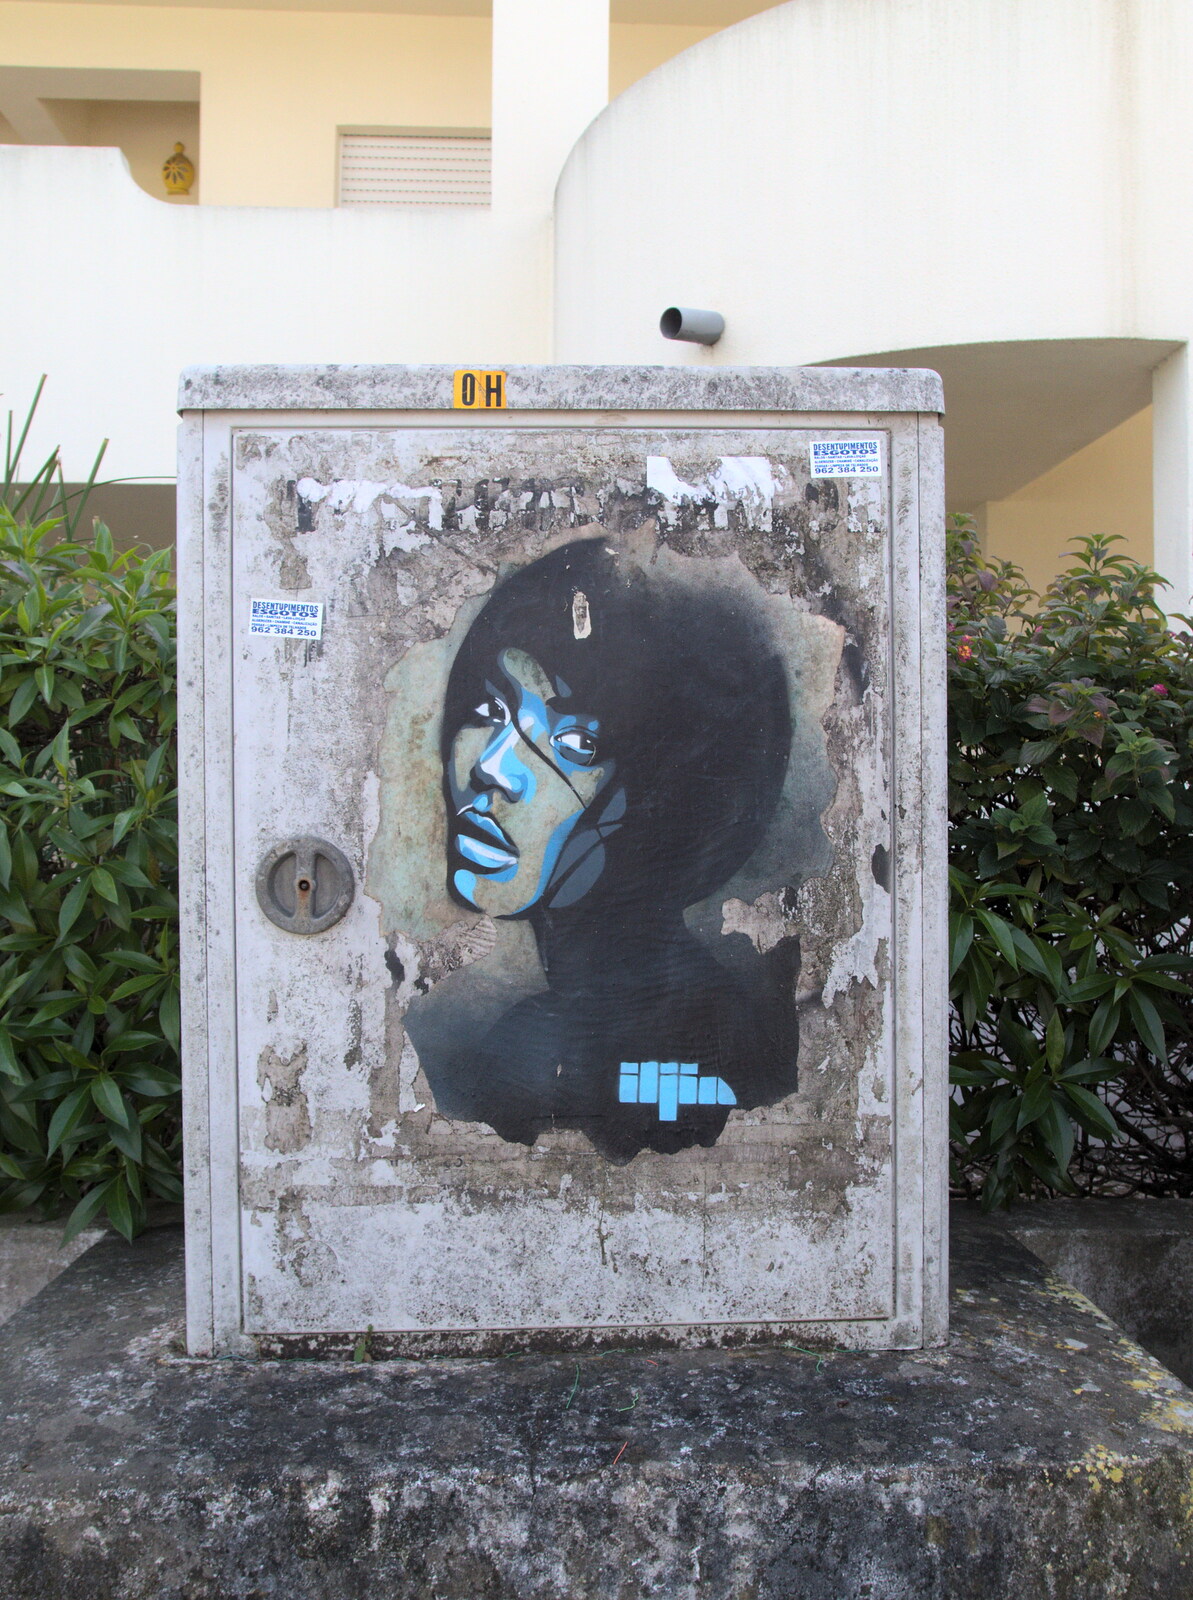 Street art on some comms cabinet from A Trip to Albufeira: The Hotel Paraiso, Portugal - 3rd April 2016